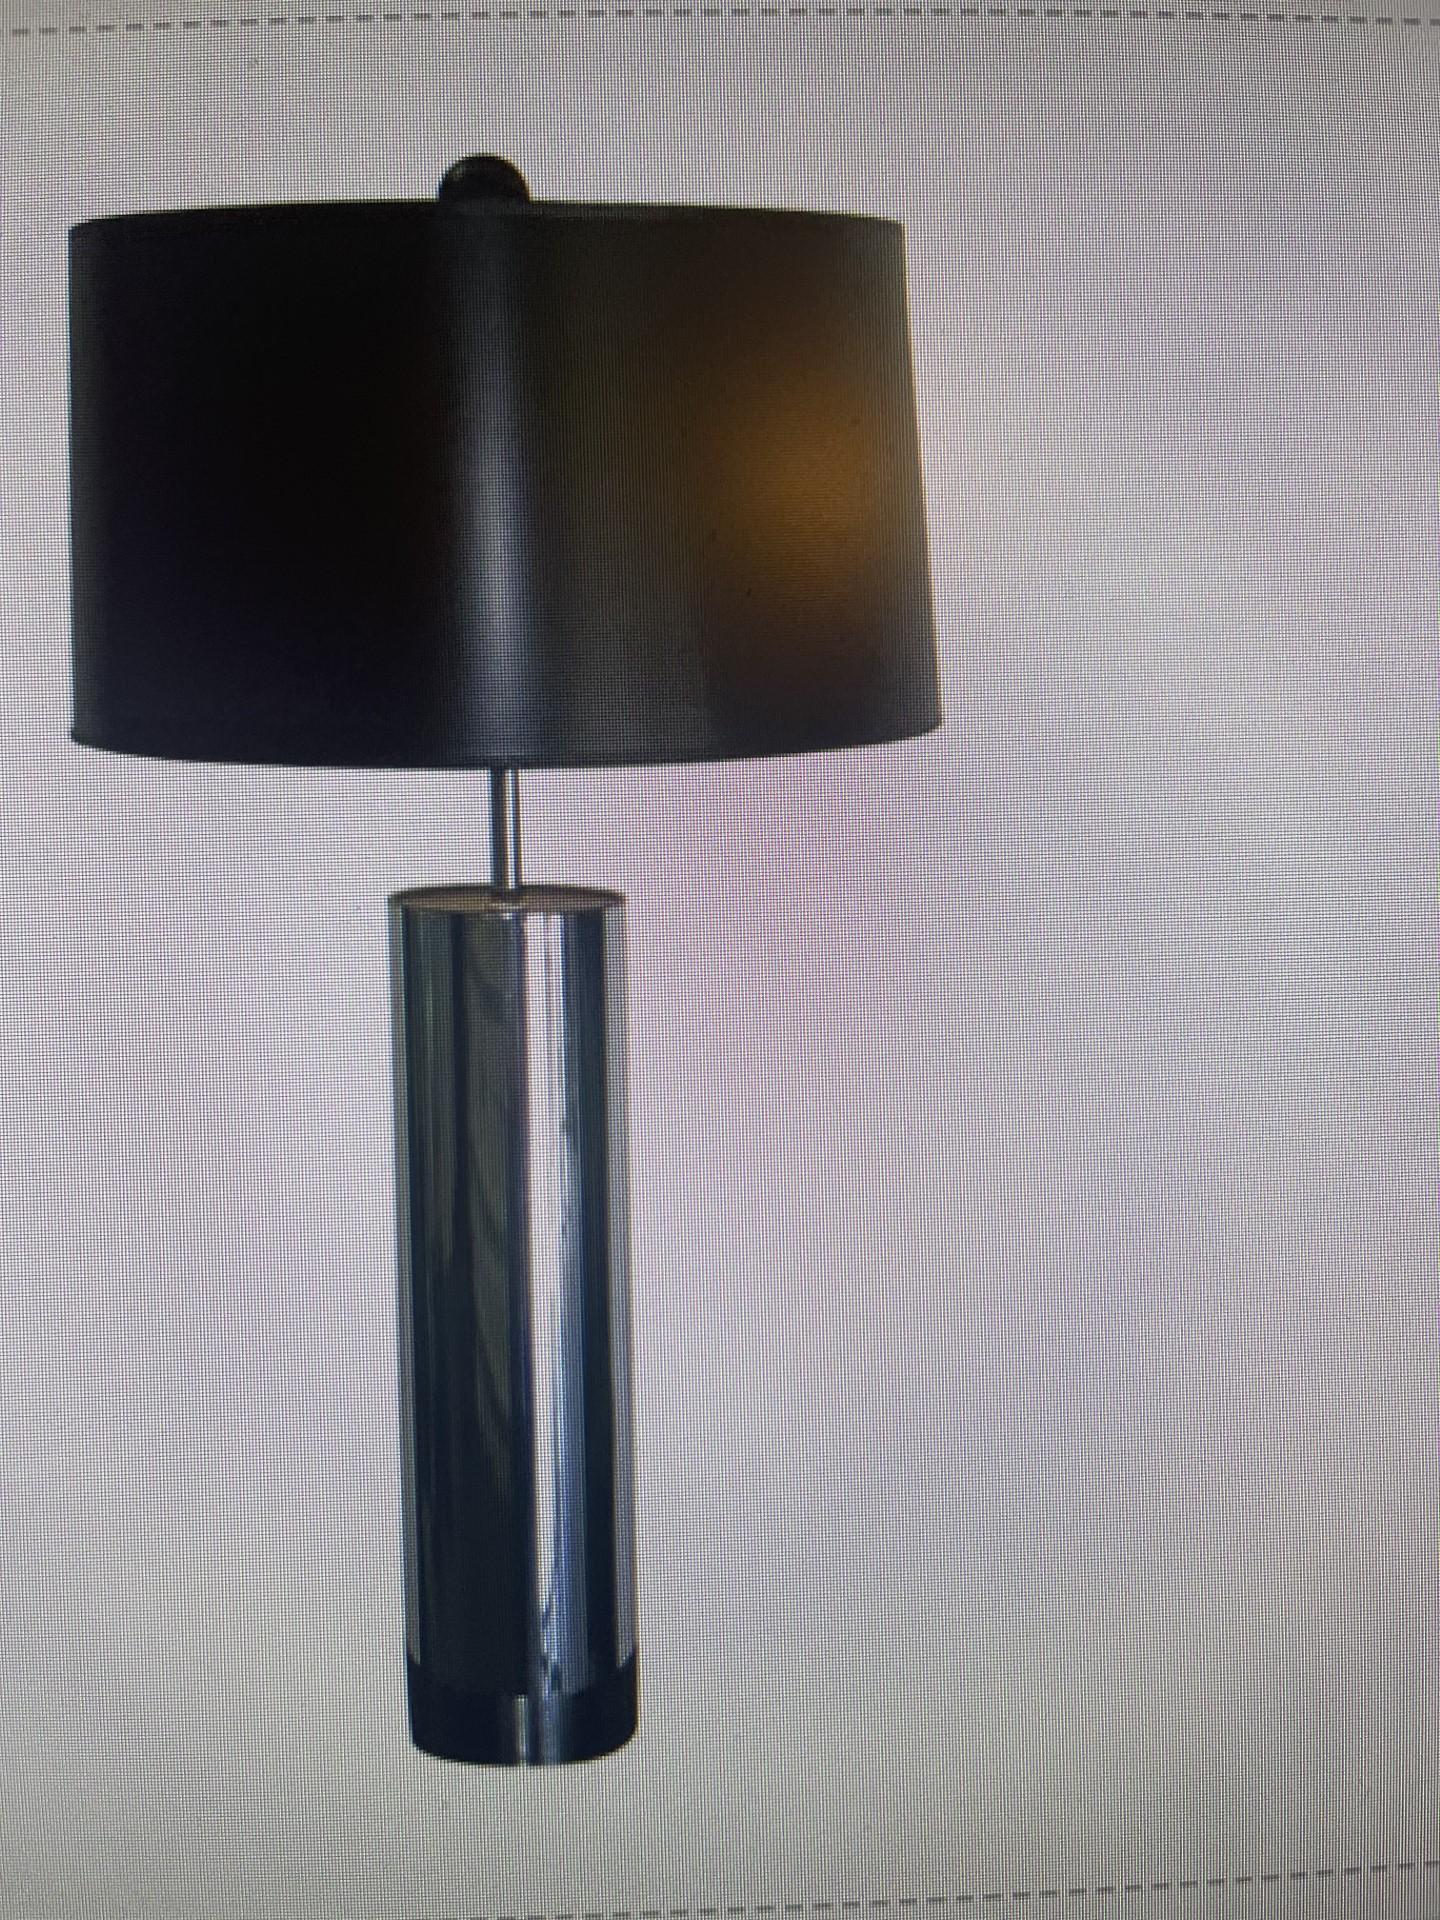 20th Century  Chrome Cylinder Lamp 1980s A Trend returning. For Sale